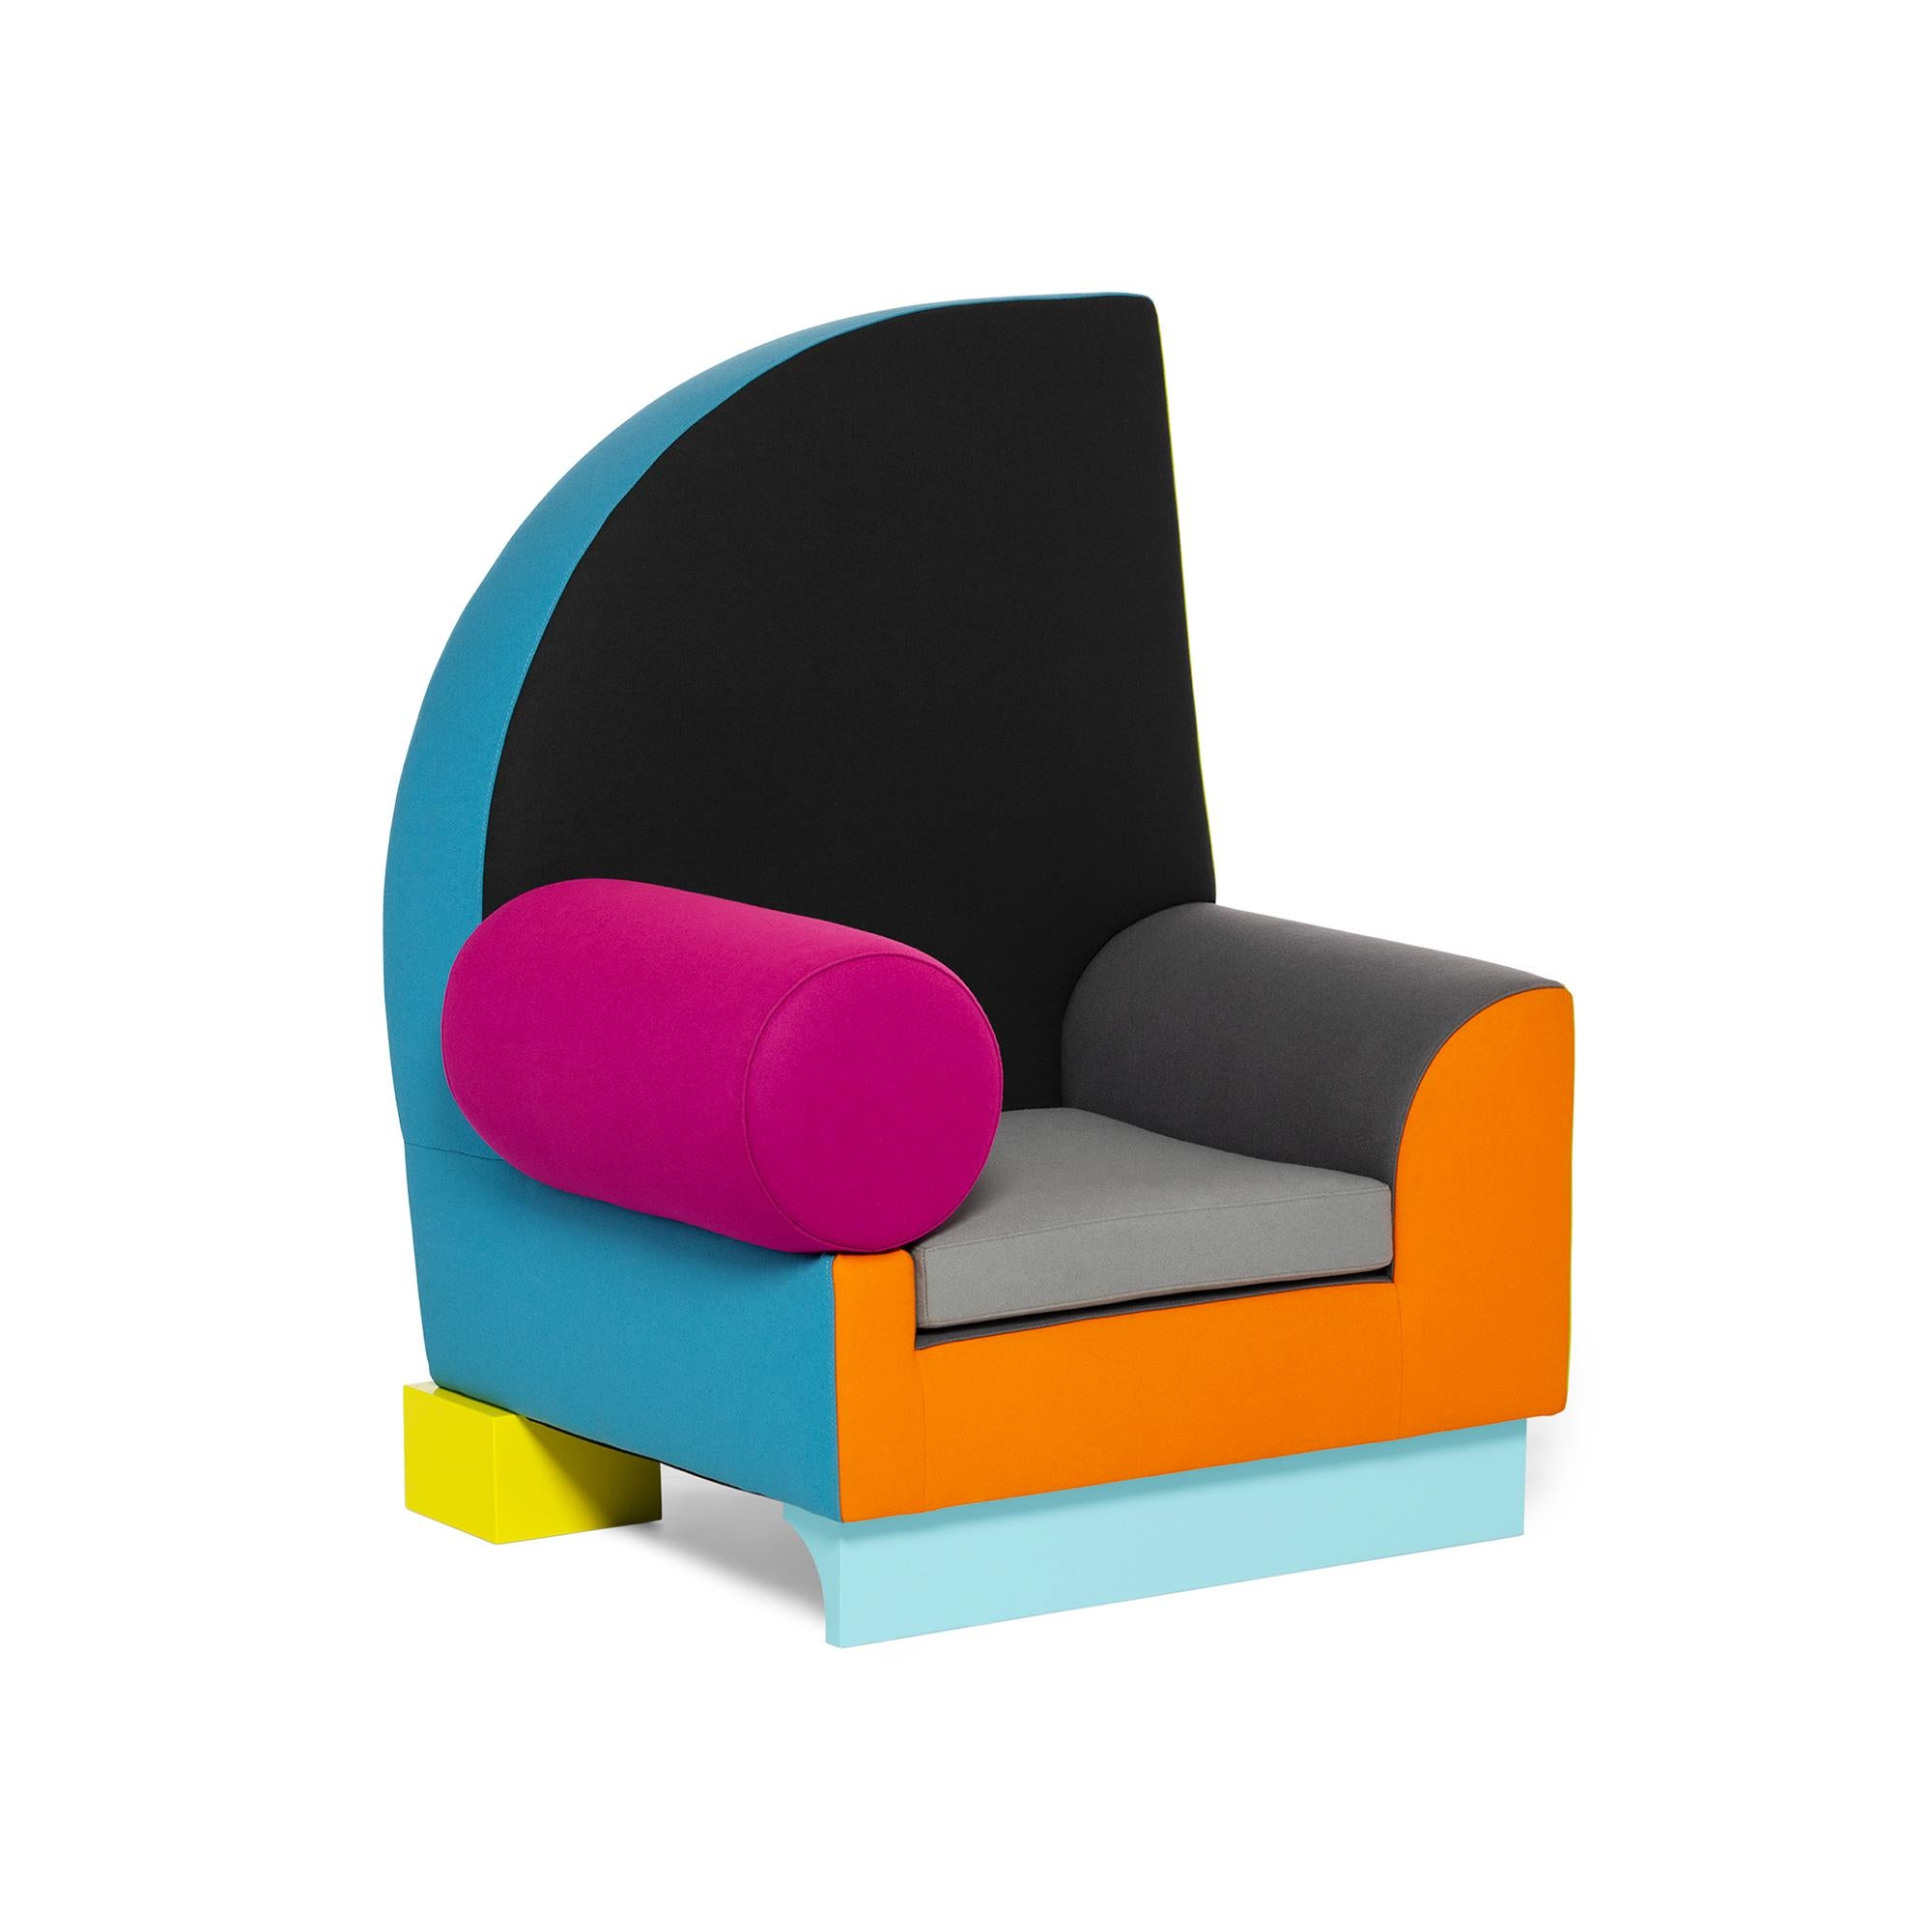 Peter Shire
1982
Armchair in wood, wool fabrics.
The Bel Air chair is a tribute to the American West Coast and surf culture. The asymmetrical back takes its cue from shark fins, while the name “Bel Air” is a reference to a famous neighborhood near